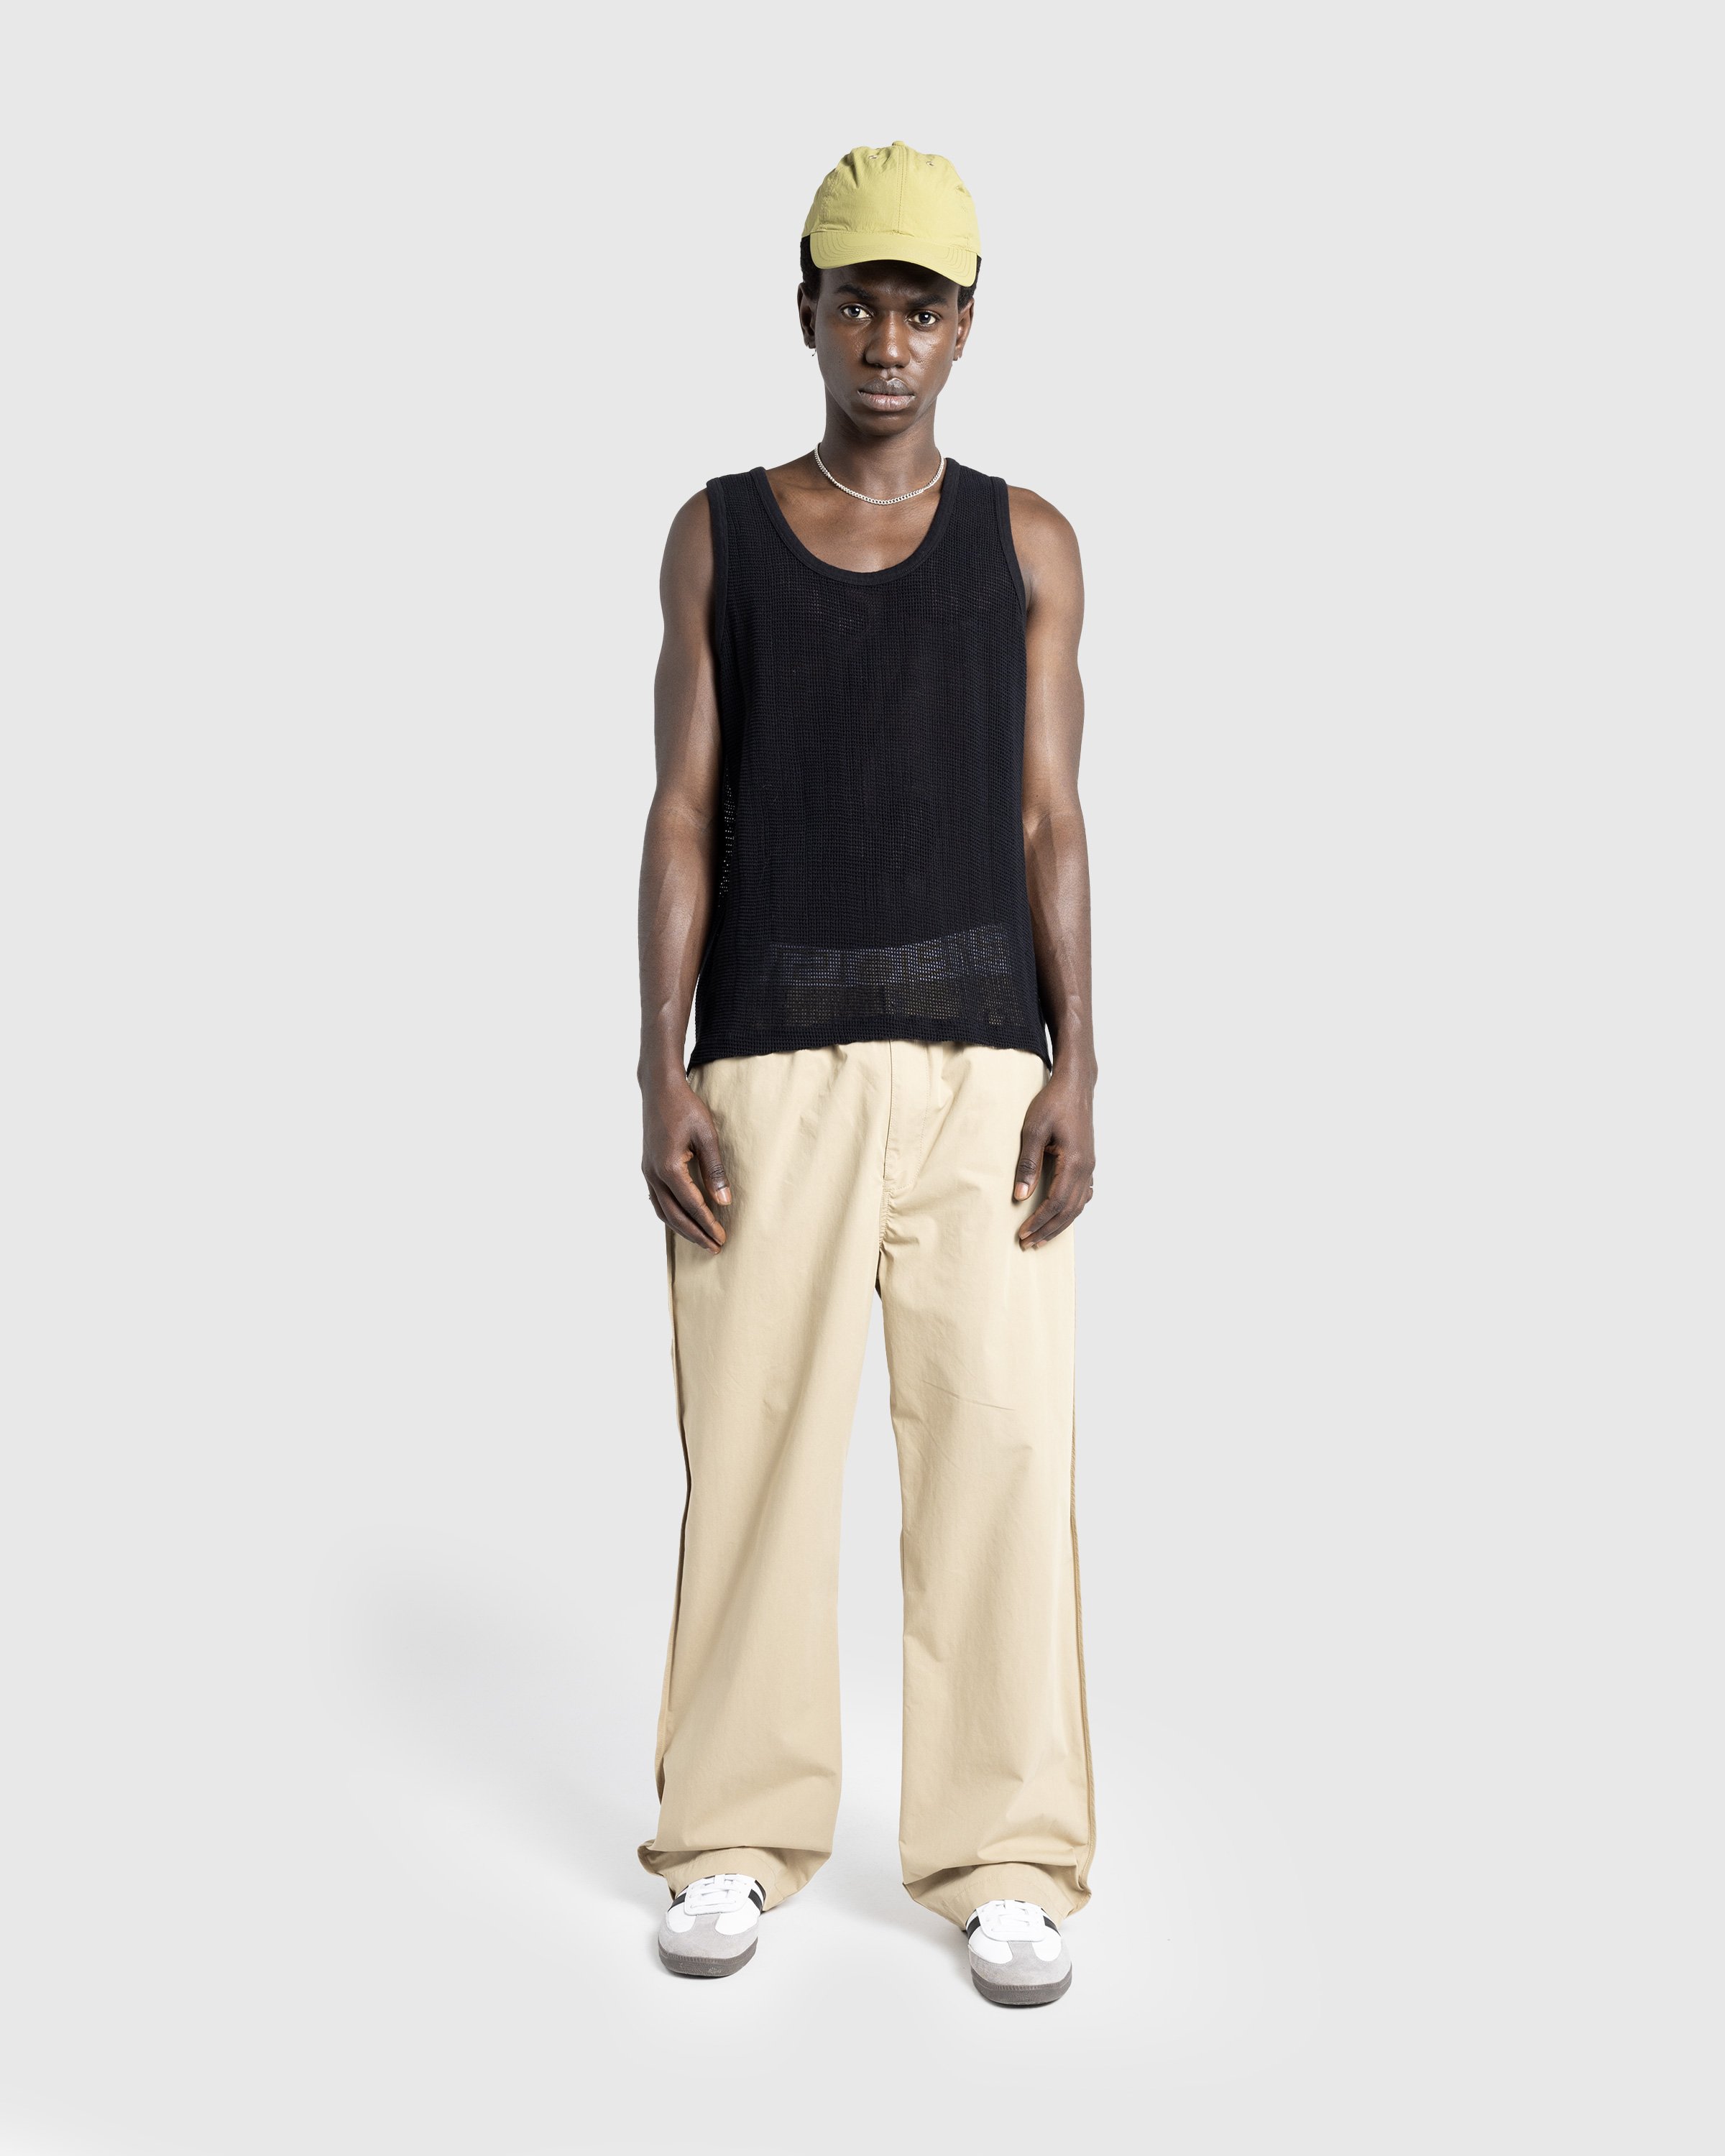 Highsnobiety HS05 - Pigment Dyed Cotton Mesh Tank Top Black - Clothing -  - Image 4